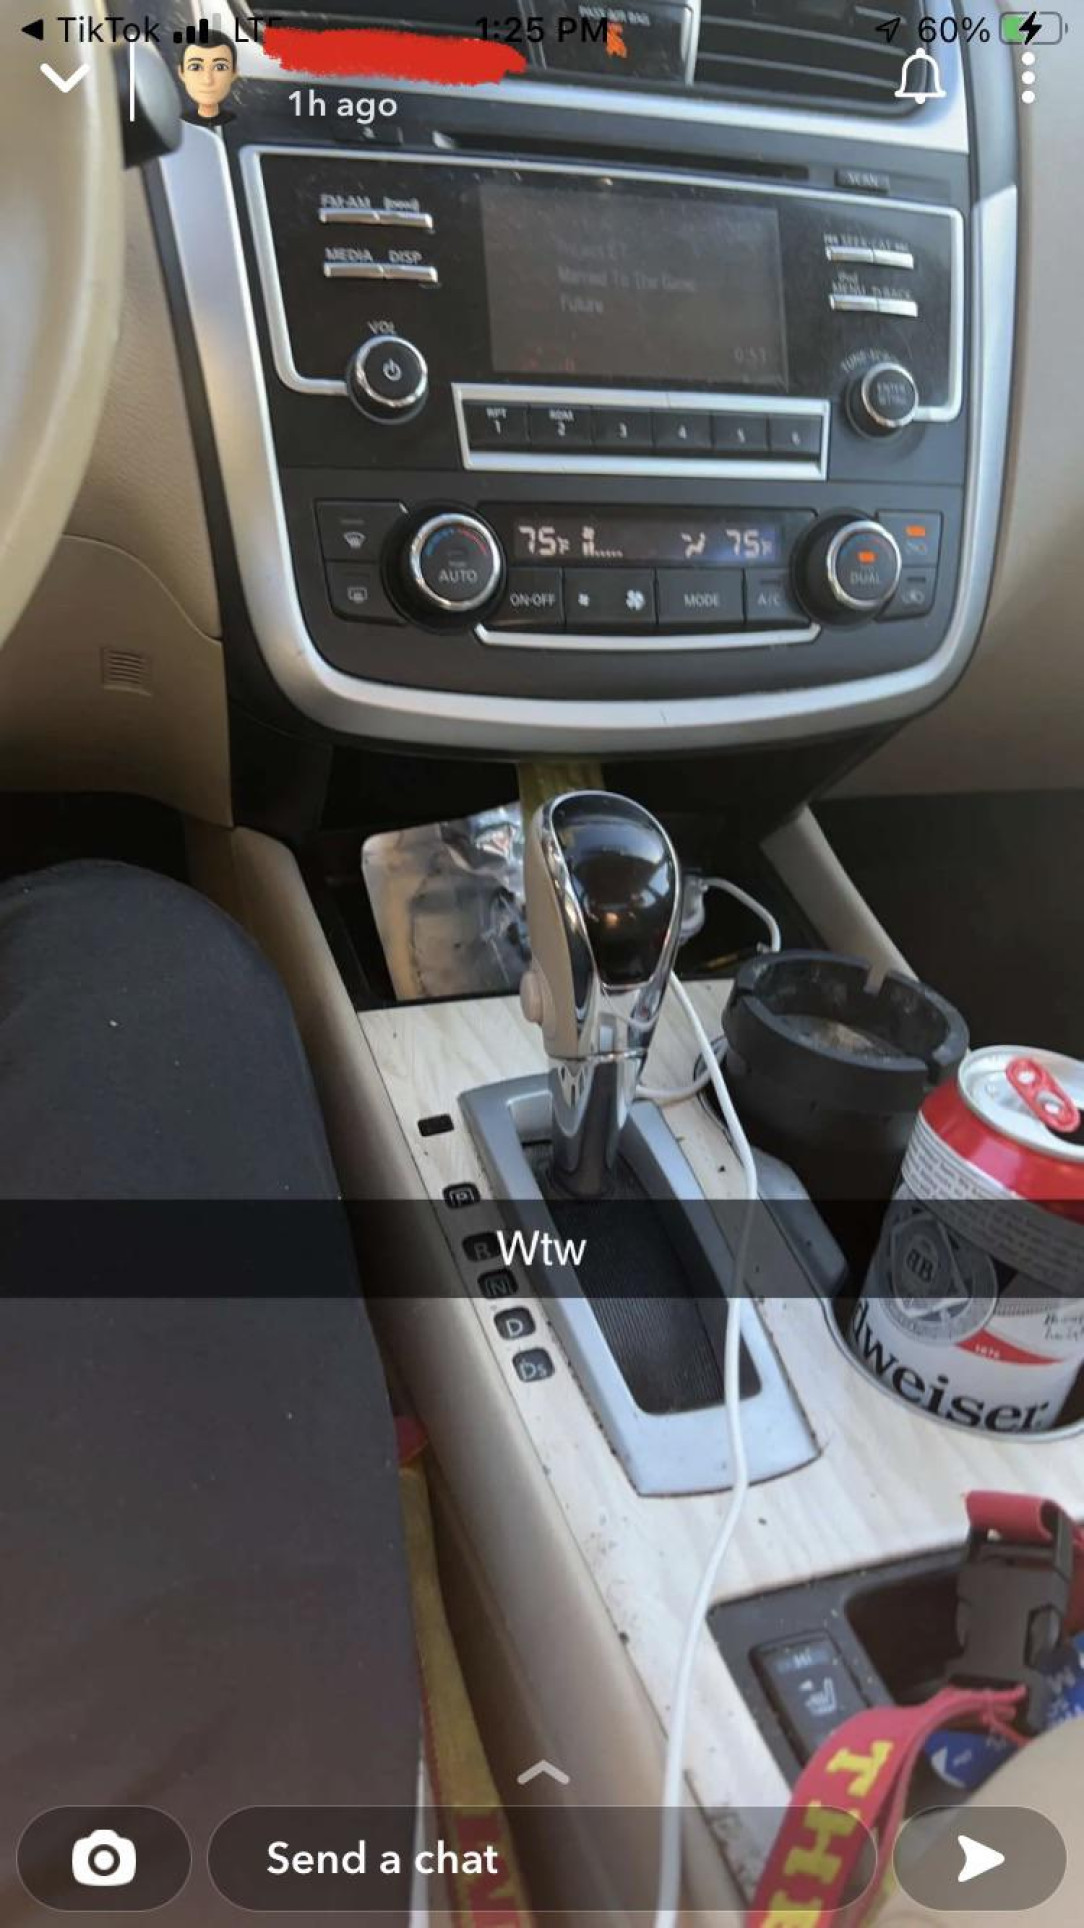 Brother posted this on his story, already has one DUI